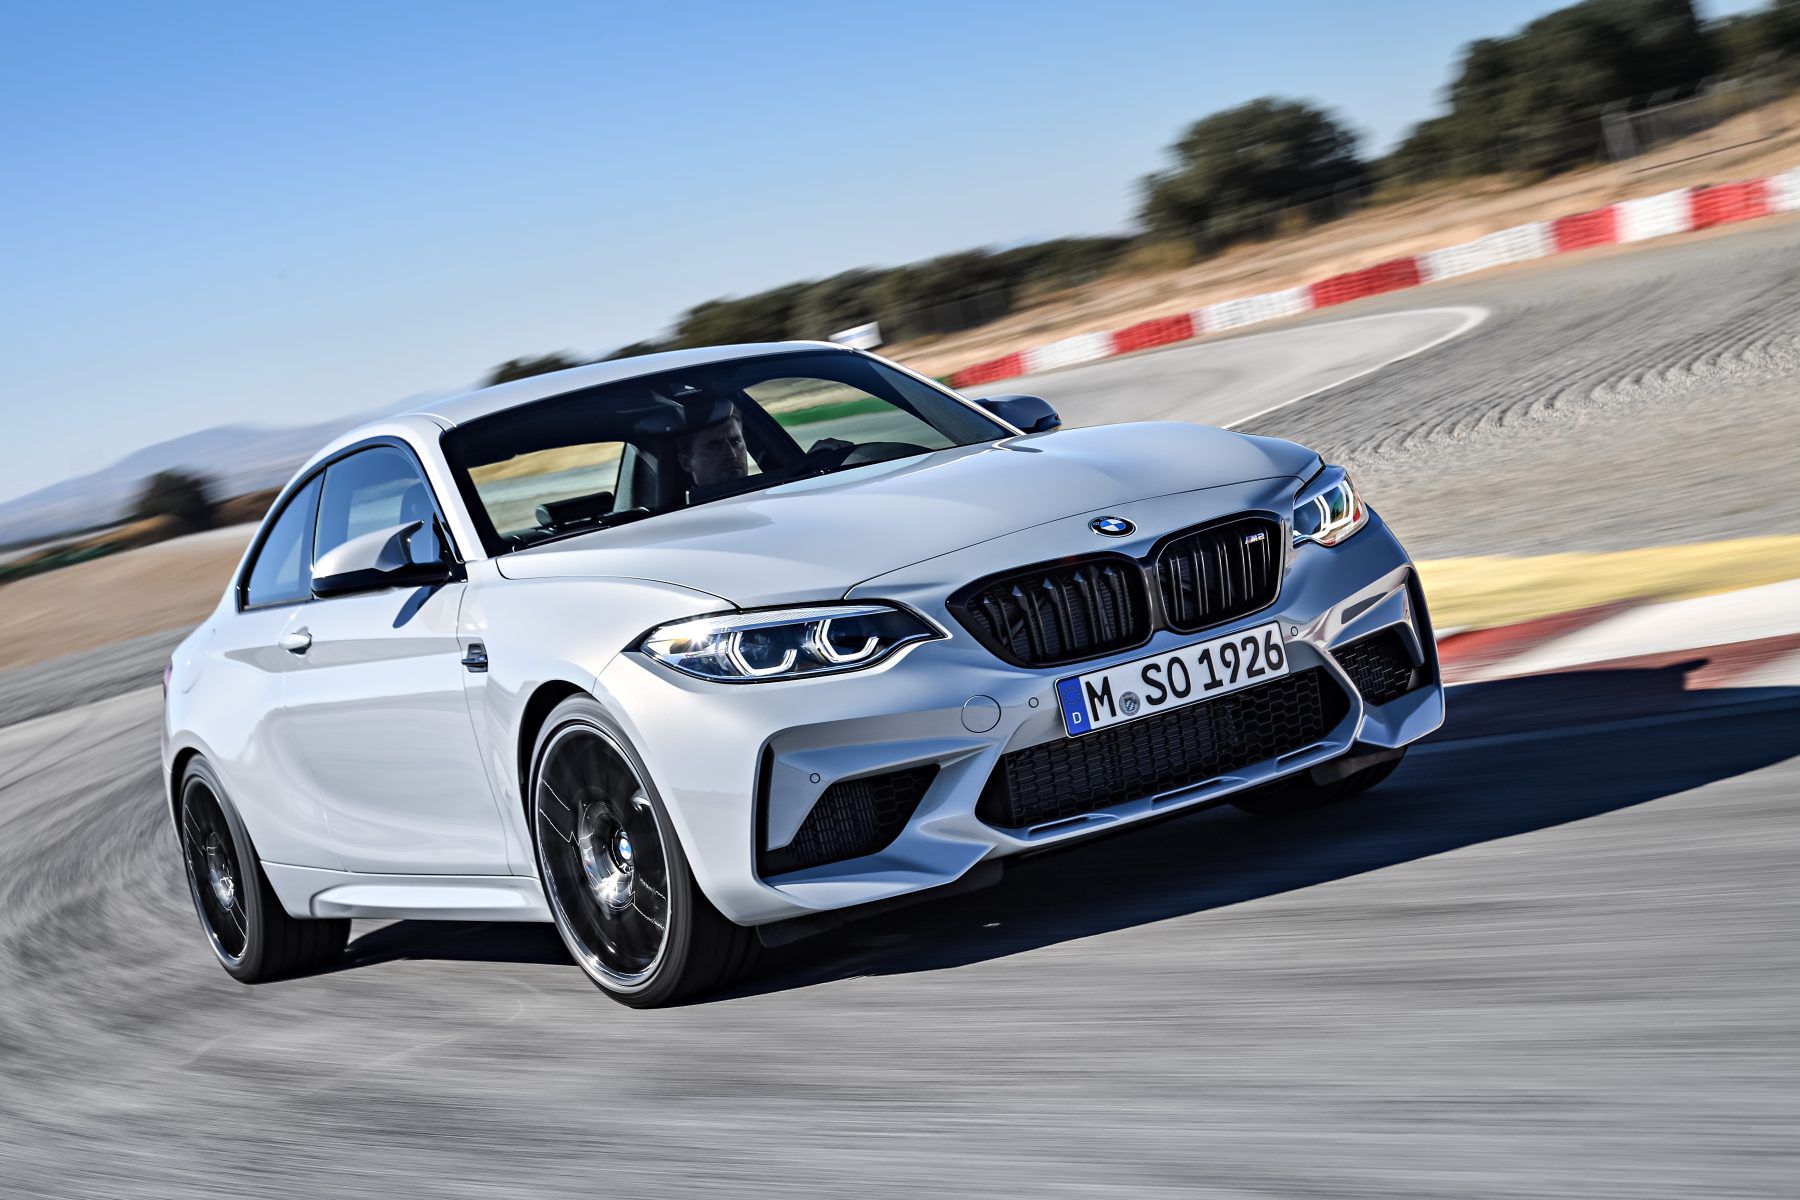 Front view of a white BMW M2 Competition driving on a track